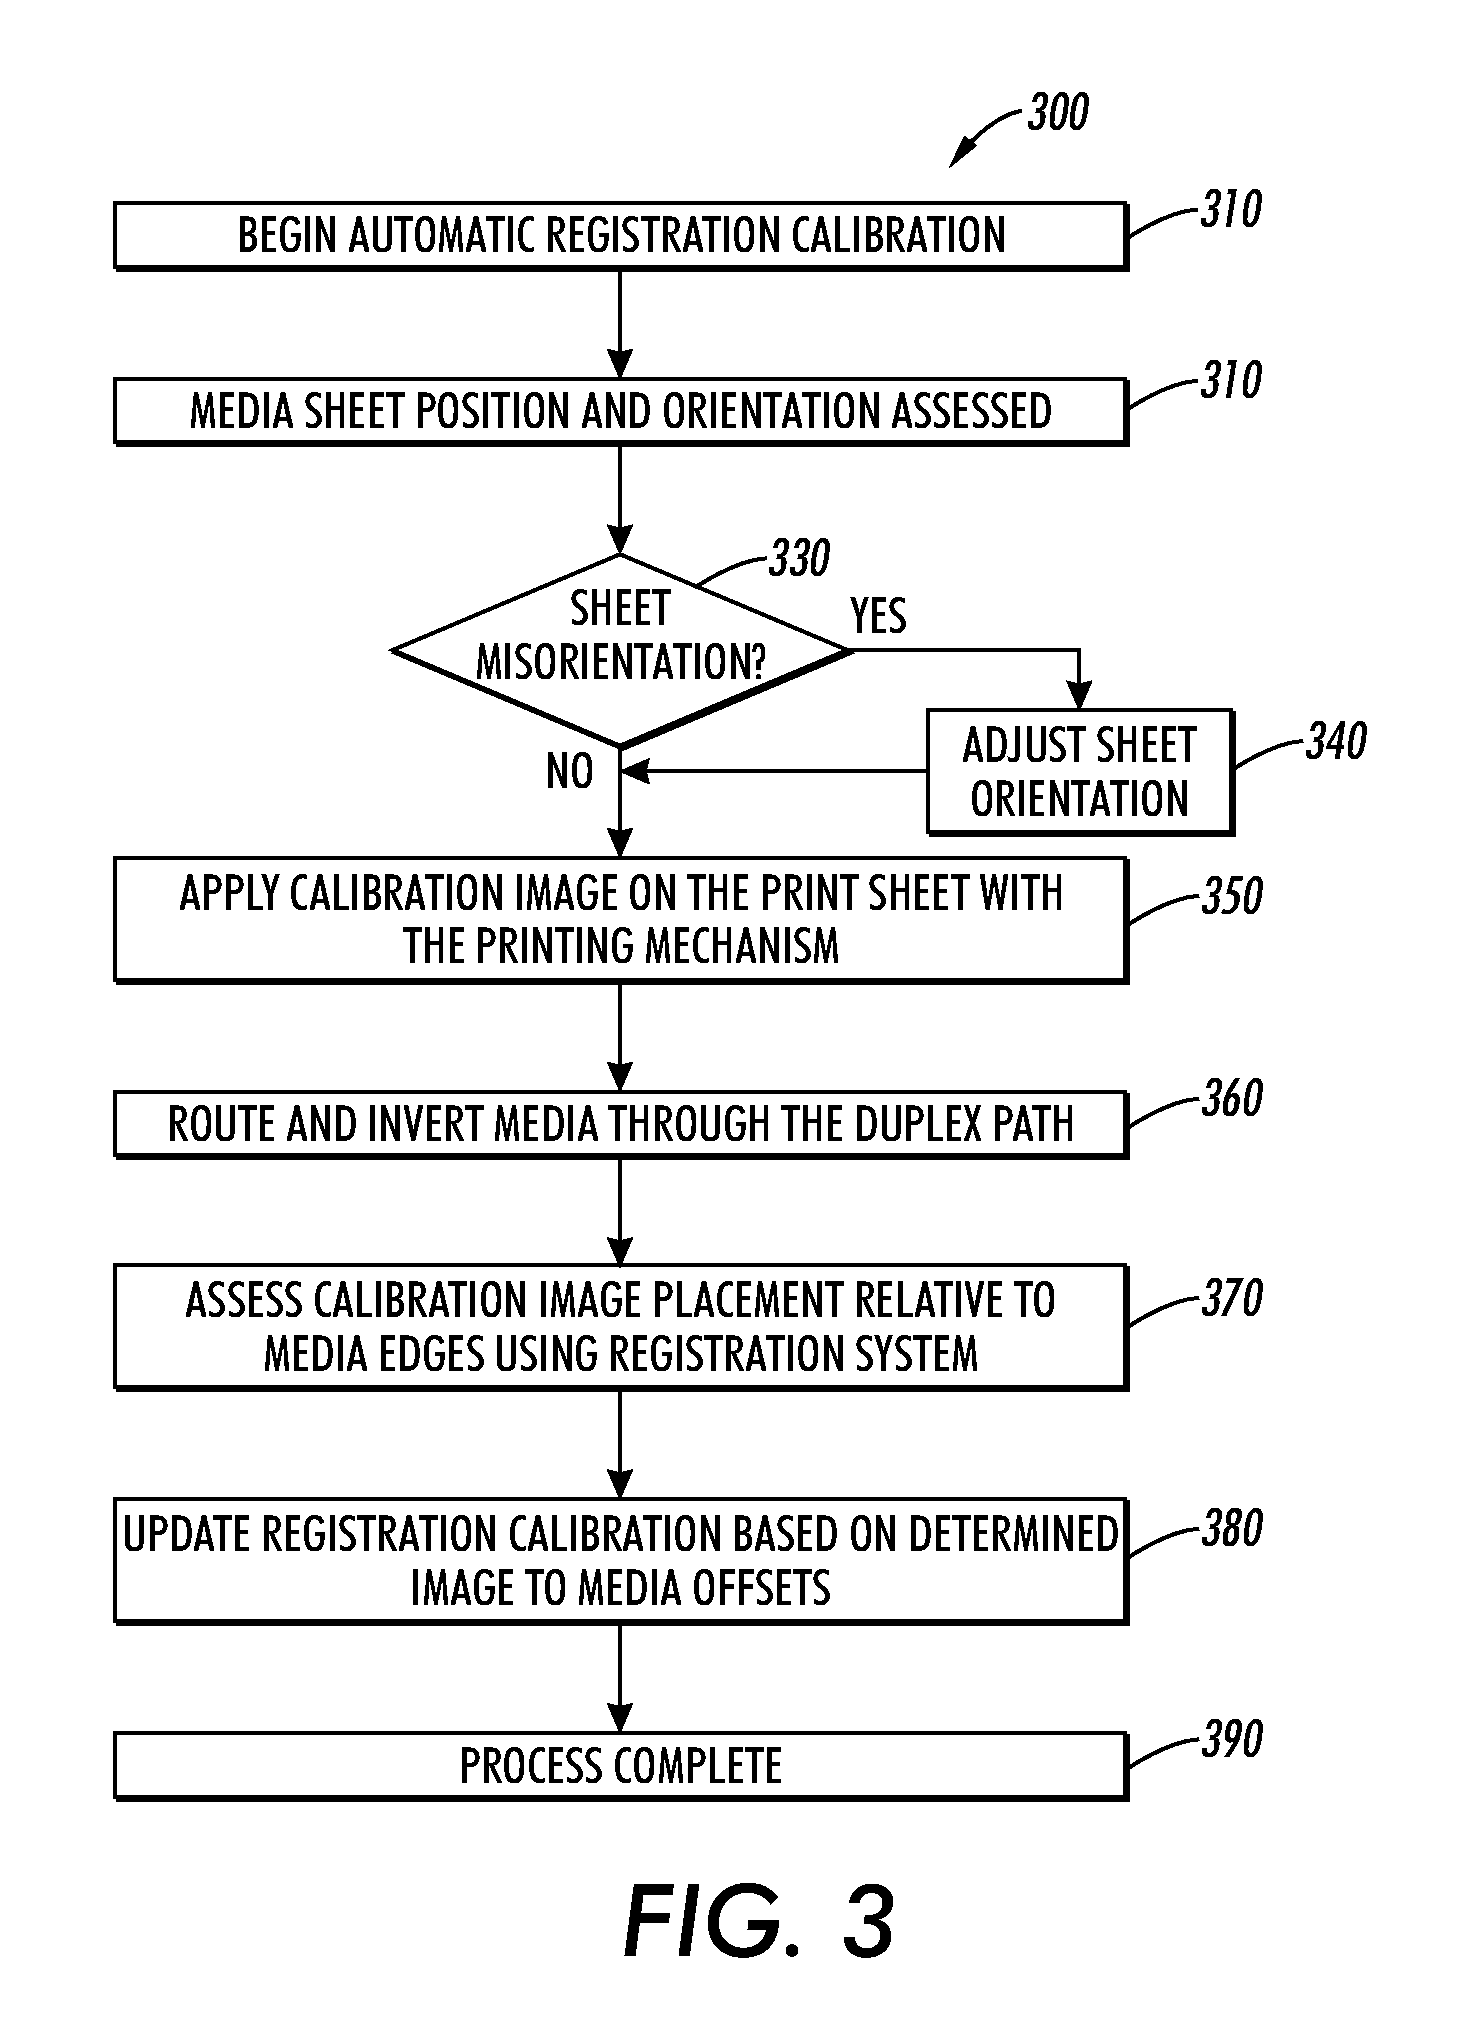 Automated method and system for self-calibration of image on media sheets using an auto duplex media path